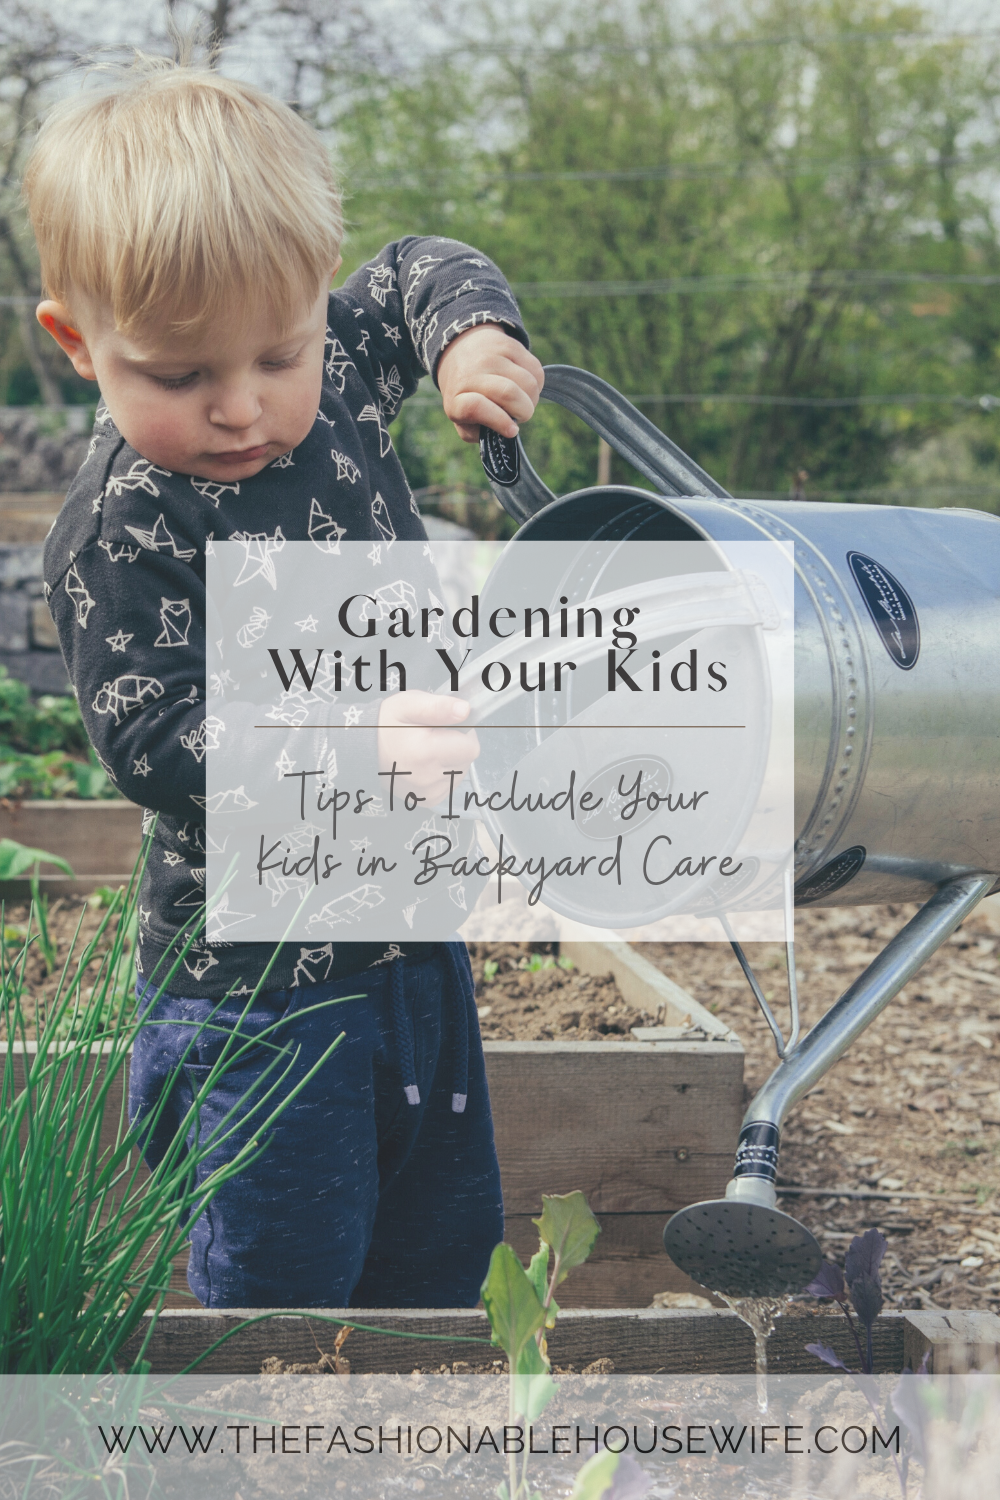 Gardening With Your Kids: Tips to Include Your Kids in Backyard Care